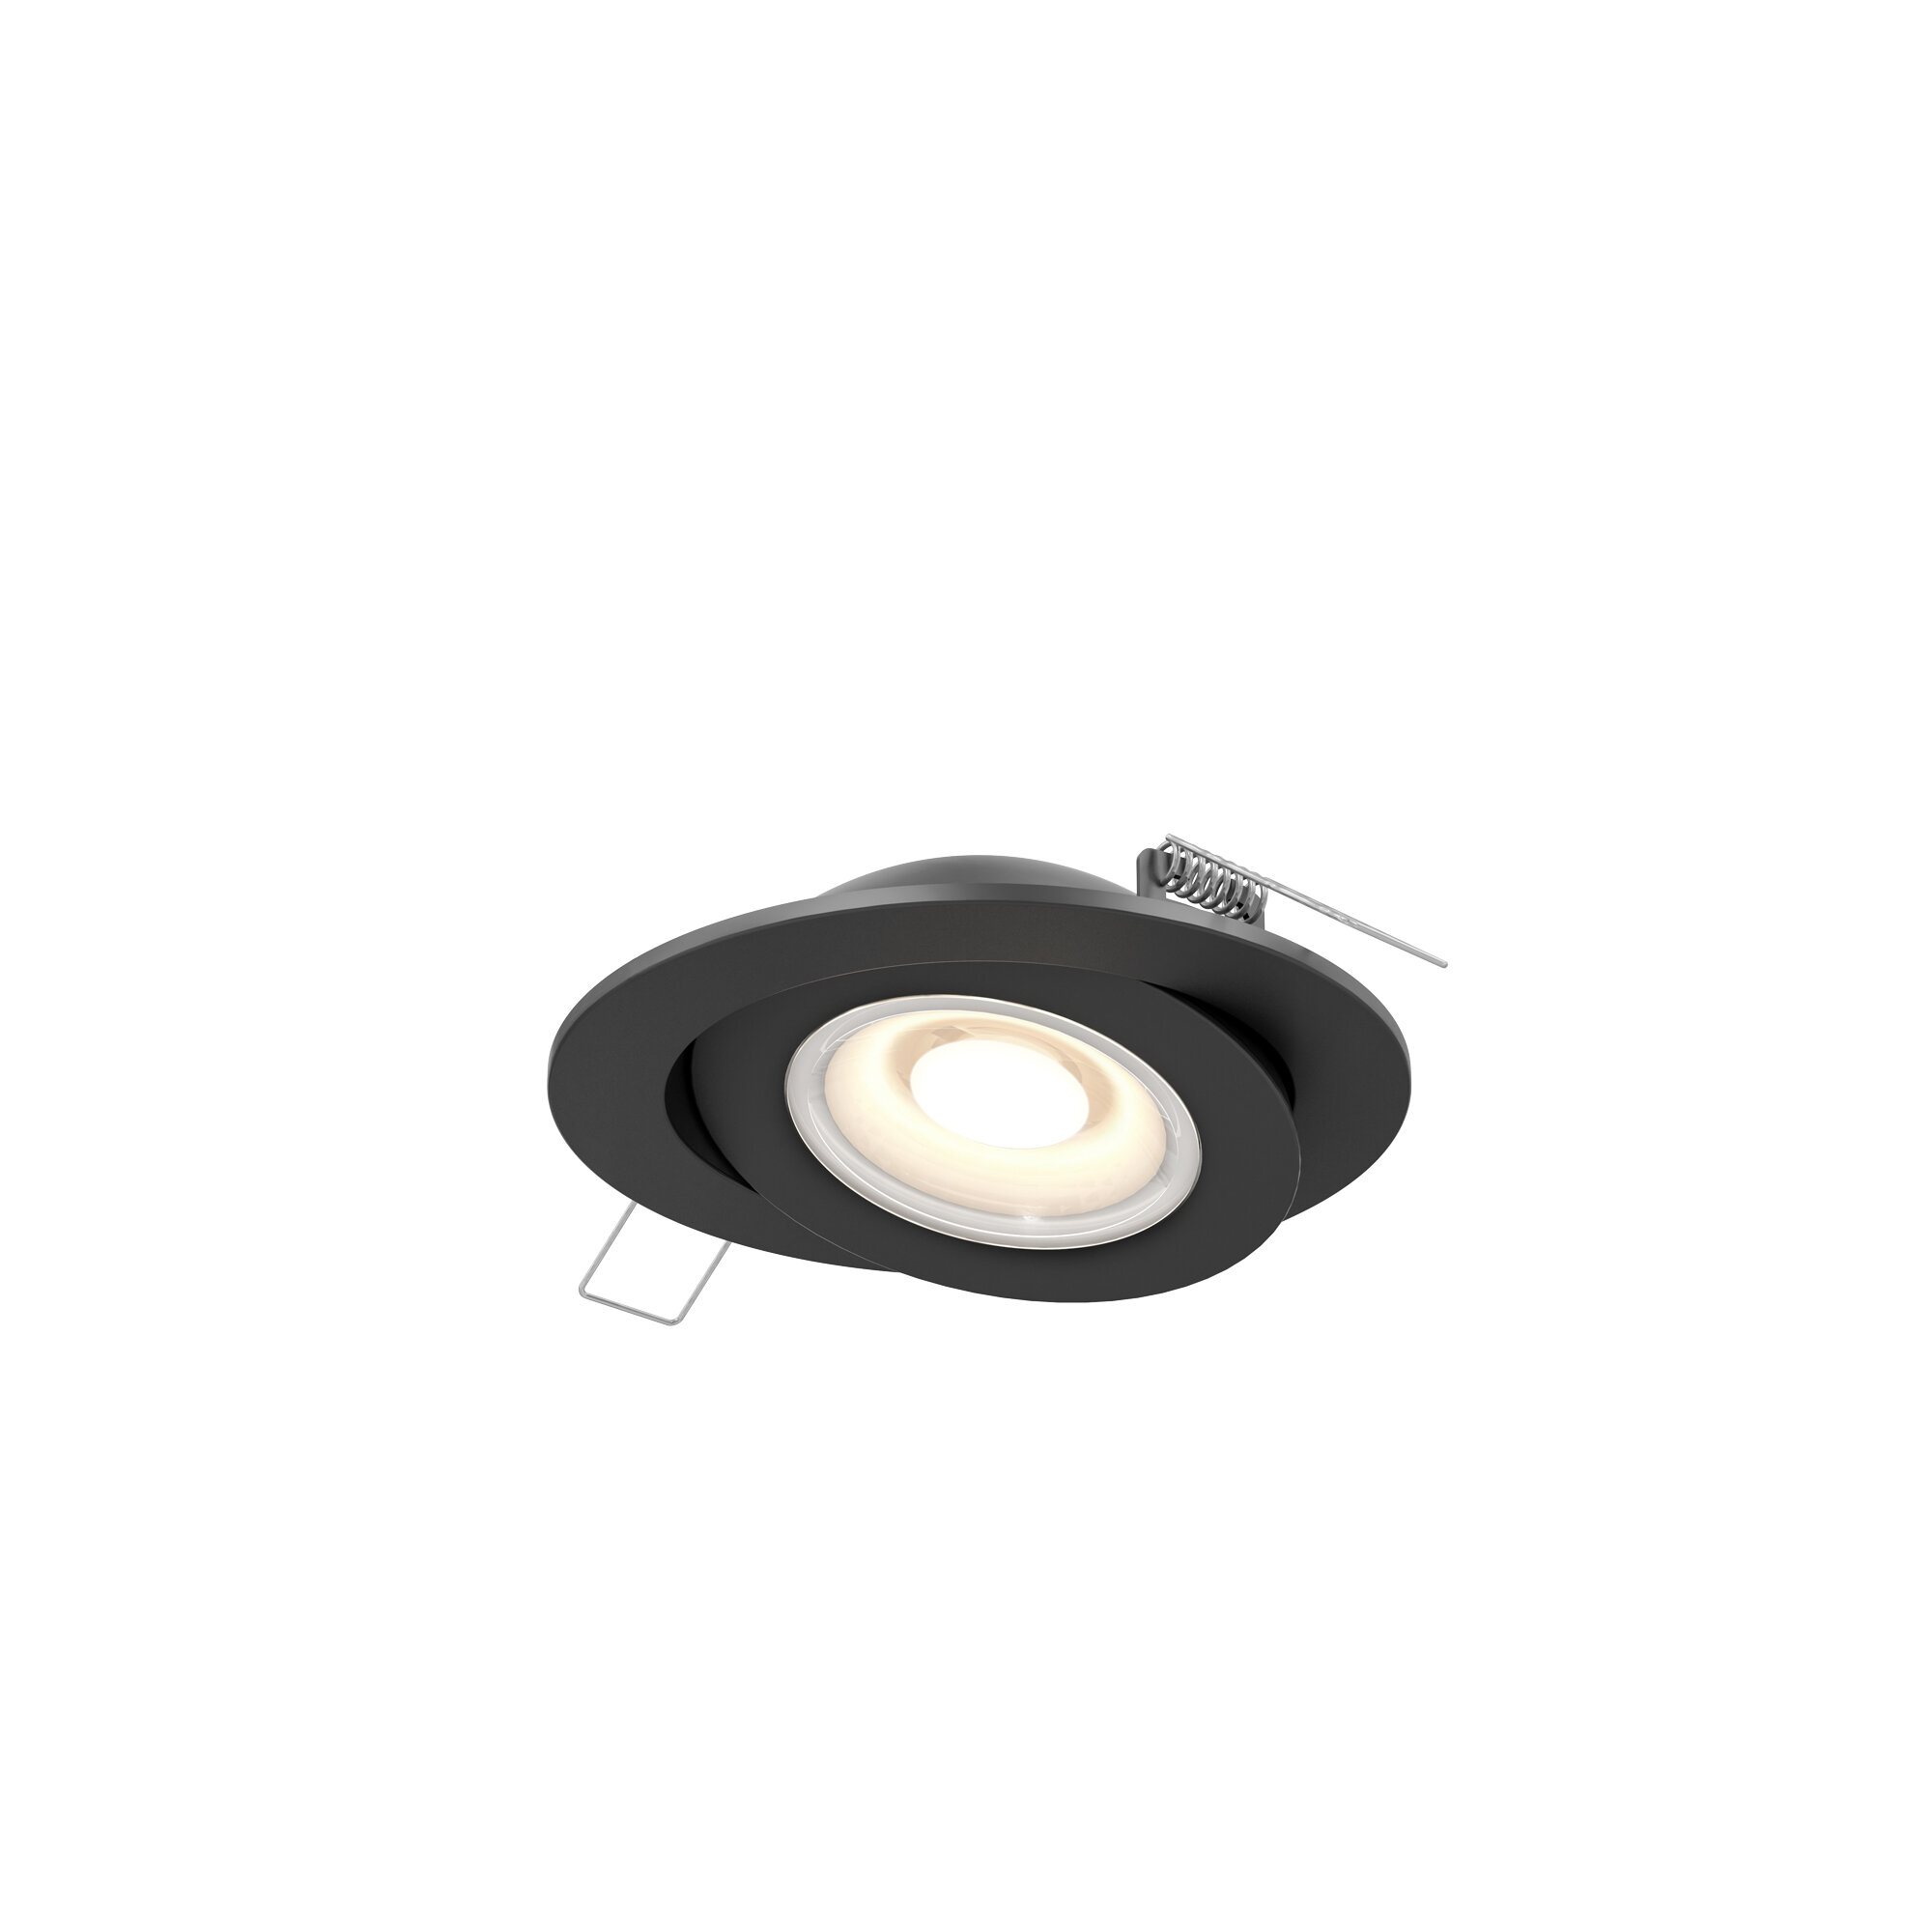 ETL & Energy Star Listed 4 inches Gimbal LED Recessed Light with Junction Box Pack of 6 Tilt & Rotate 15W,1000 Lumen TRIAC Dimming 5000K White 